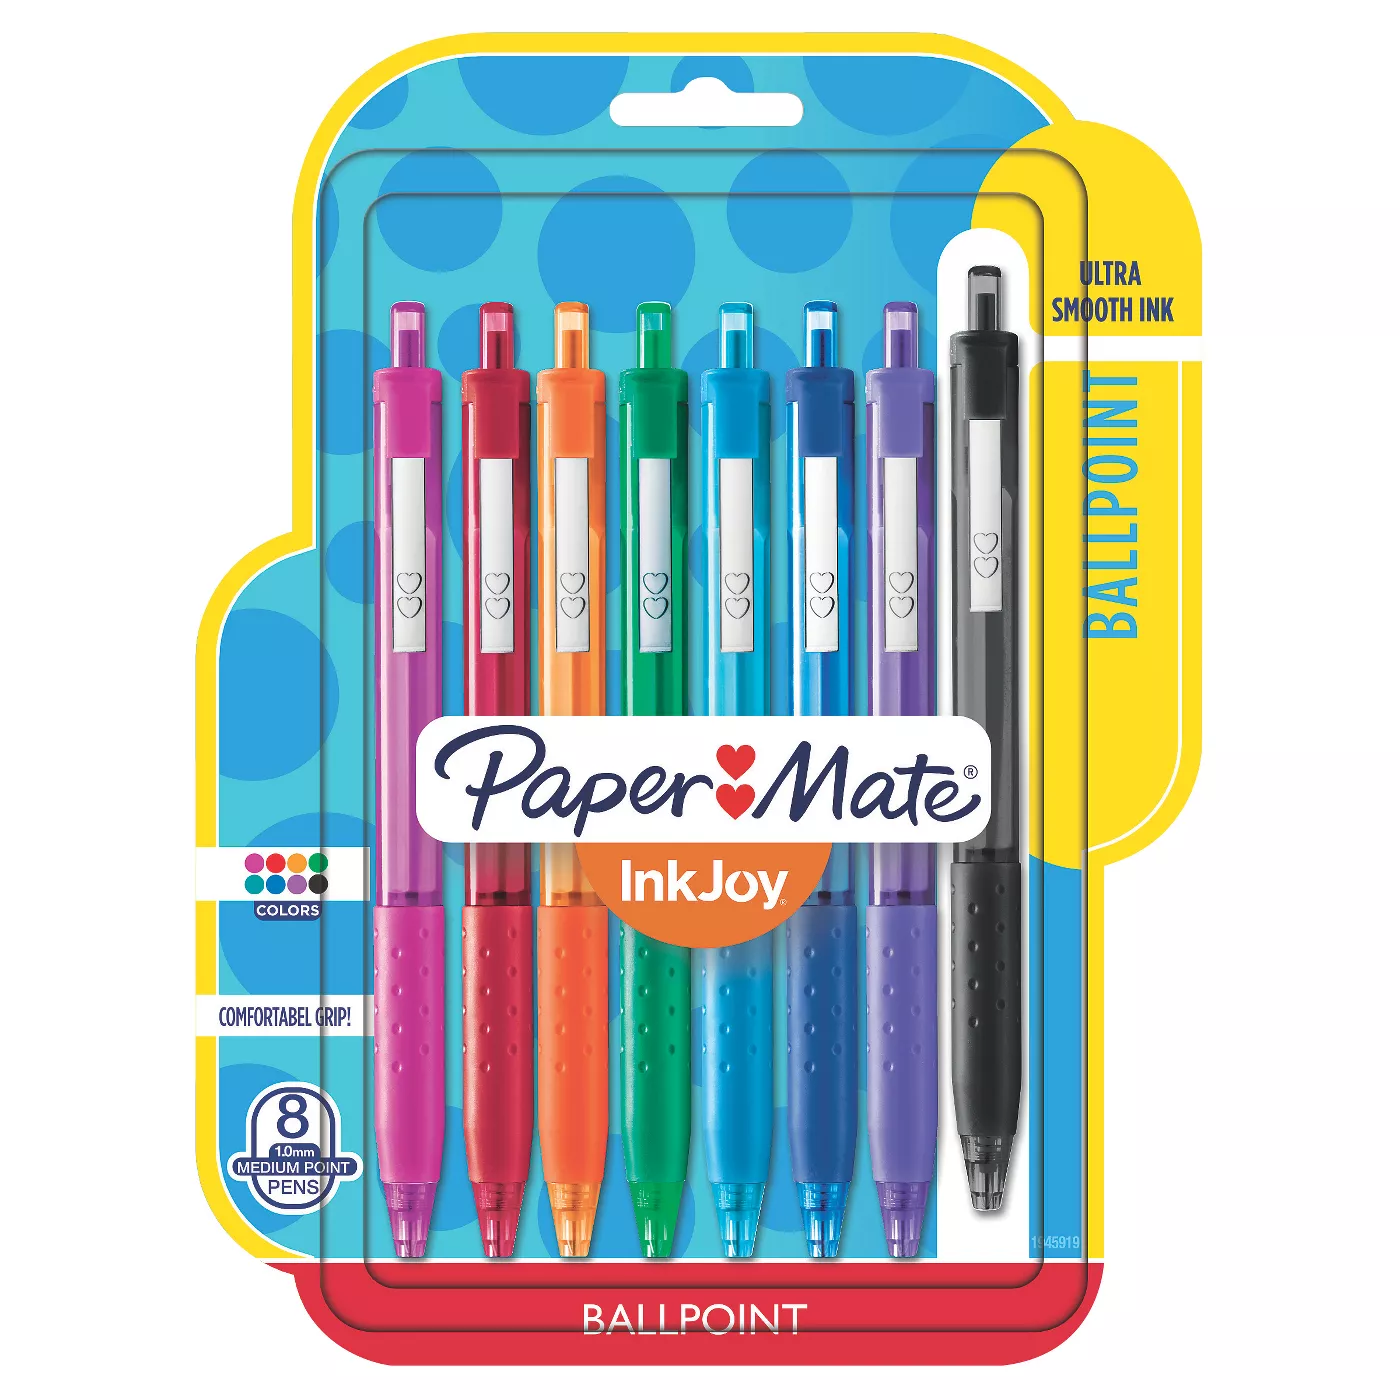 Paper MateÂ® Inkjoy 300RT Retractable Ballpoint Pen, 1mm, 8ct - Multicolor - image 1 of 8